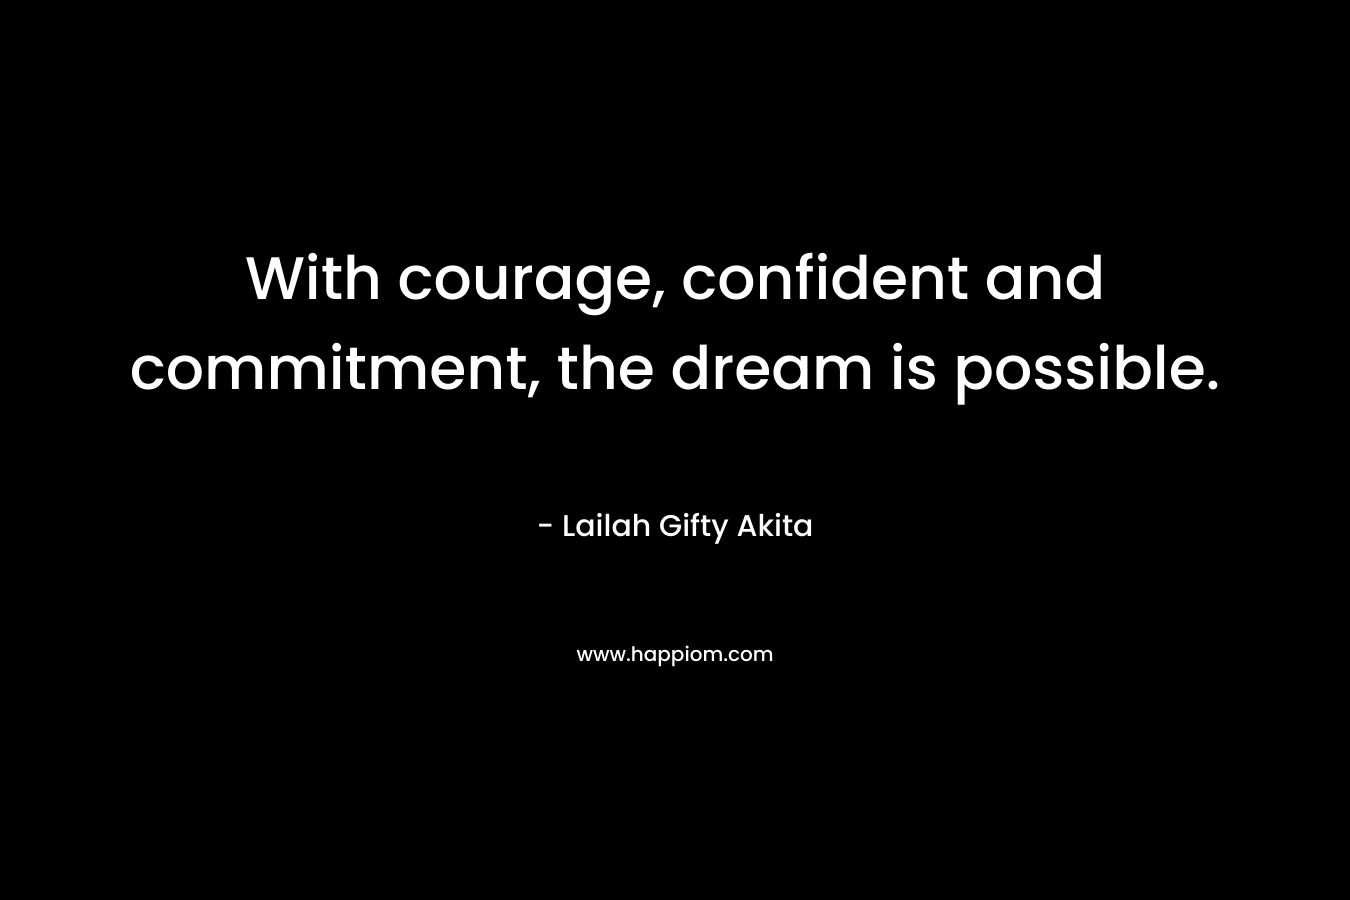 With courage, confident and commitment, the dream is possible.